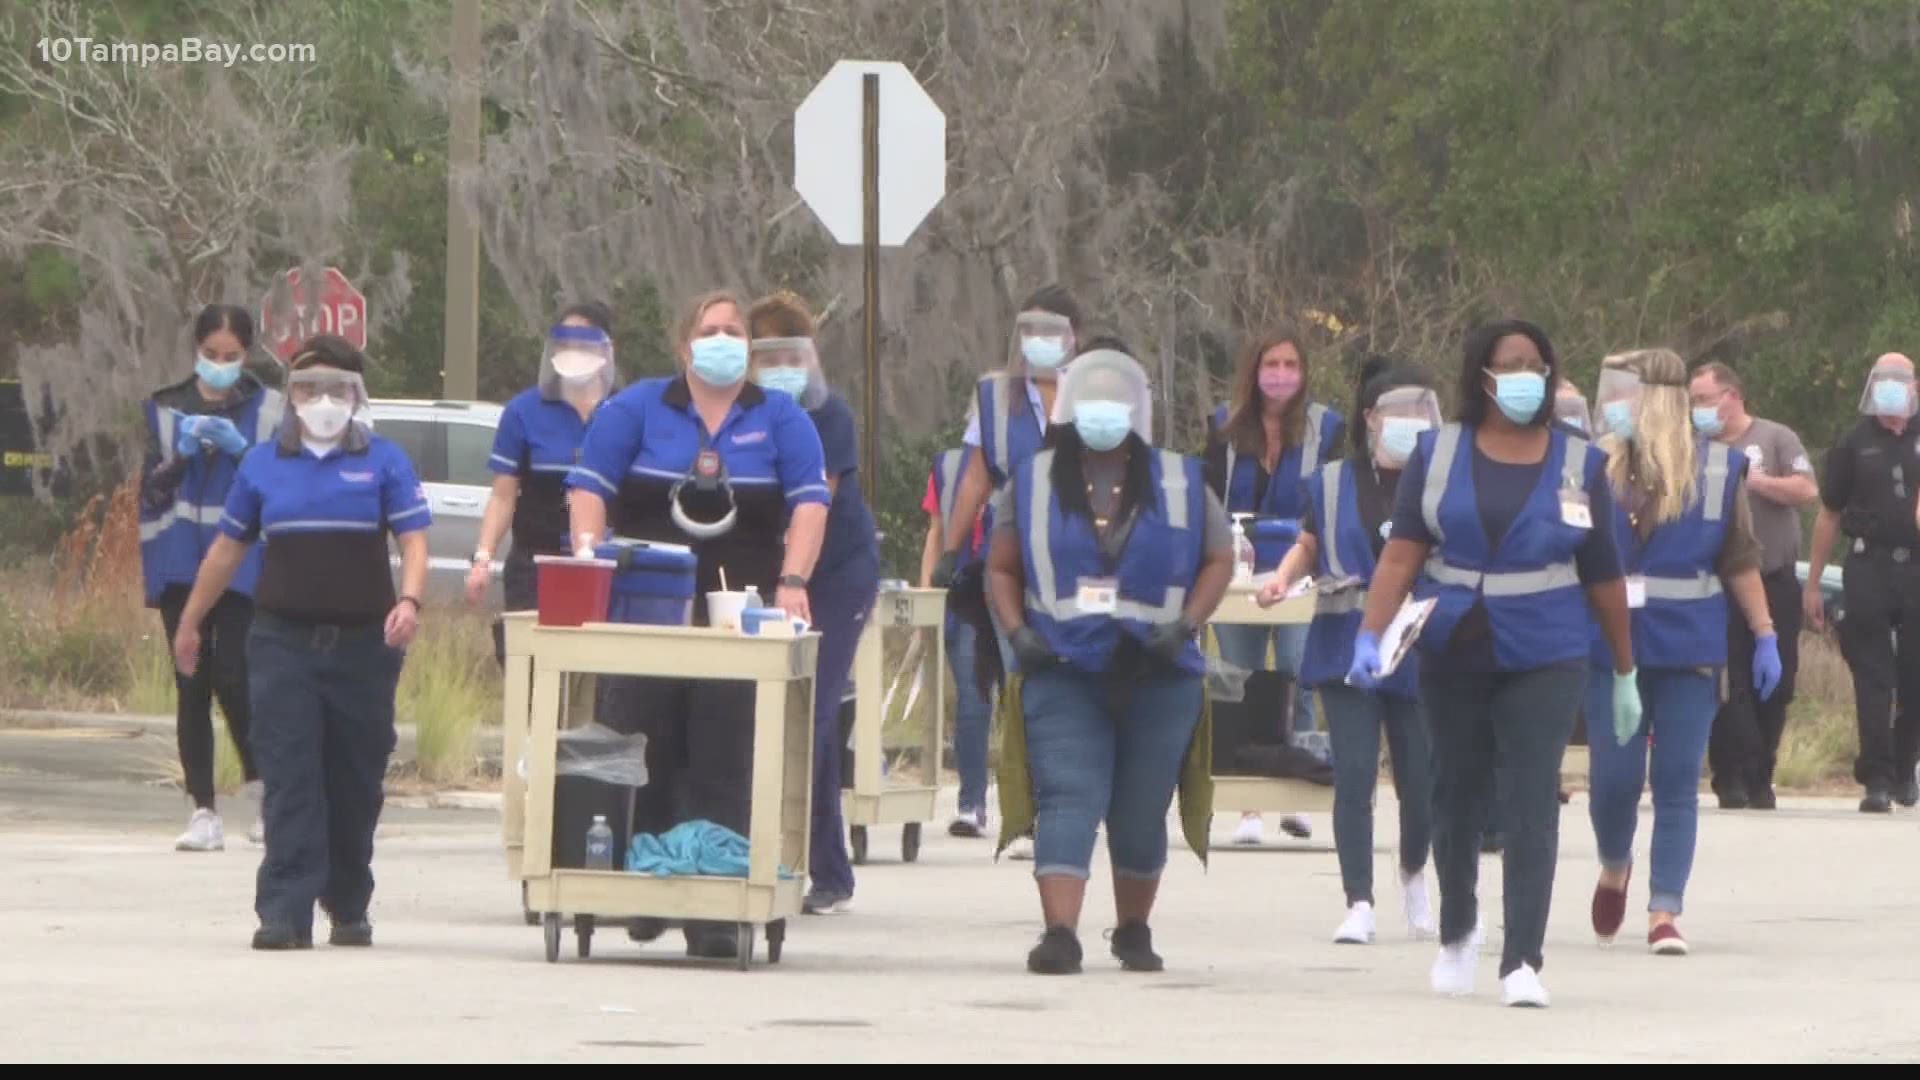 As COVID-19 vaccine shipments continue to make their way to Tampa Bay, different counties are releasing plans to make sure high-priority groups get vaccinated.